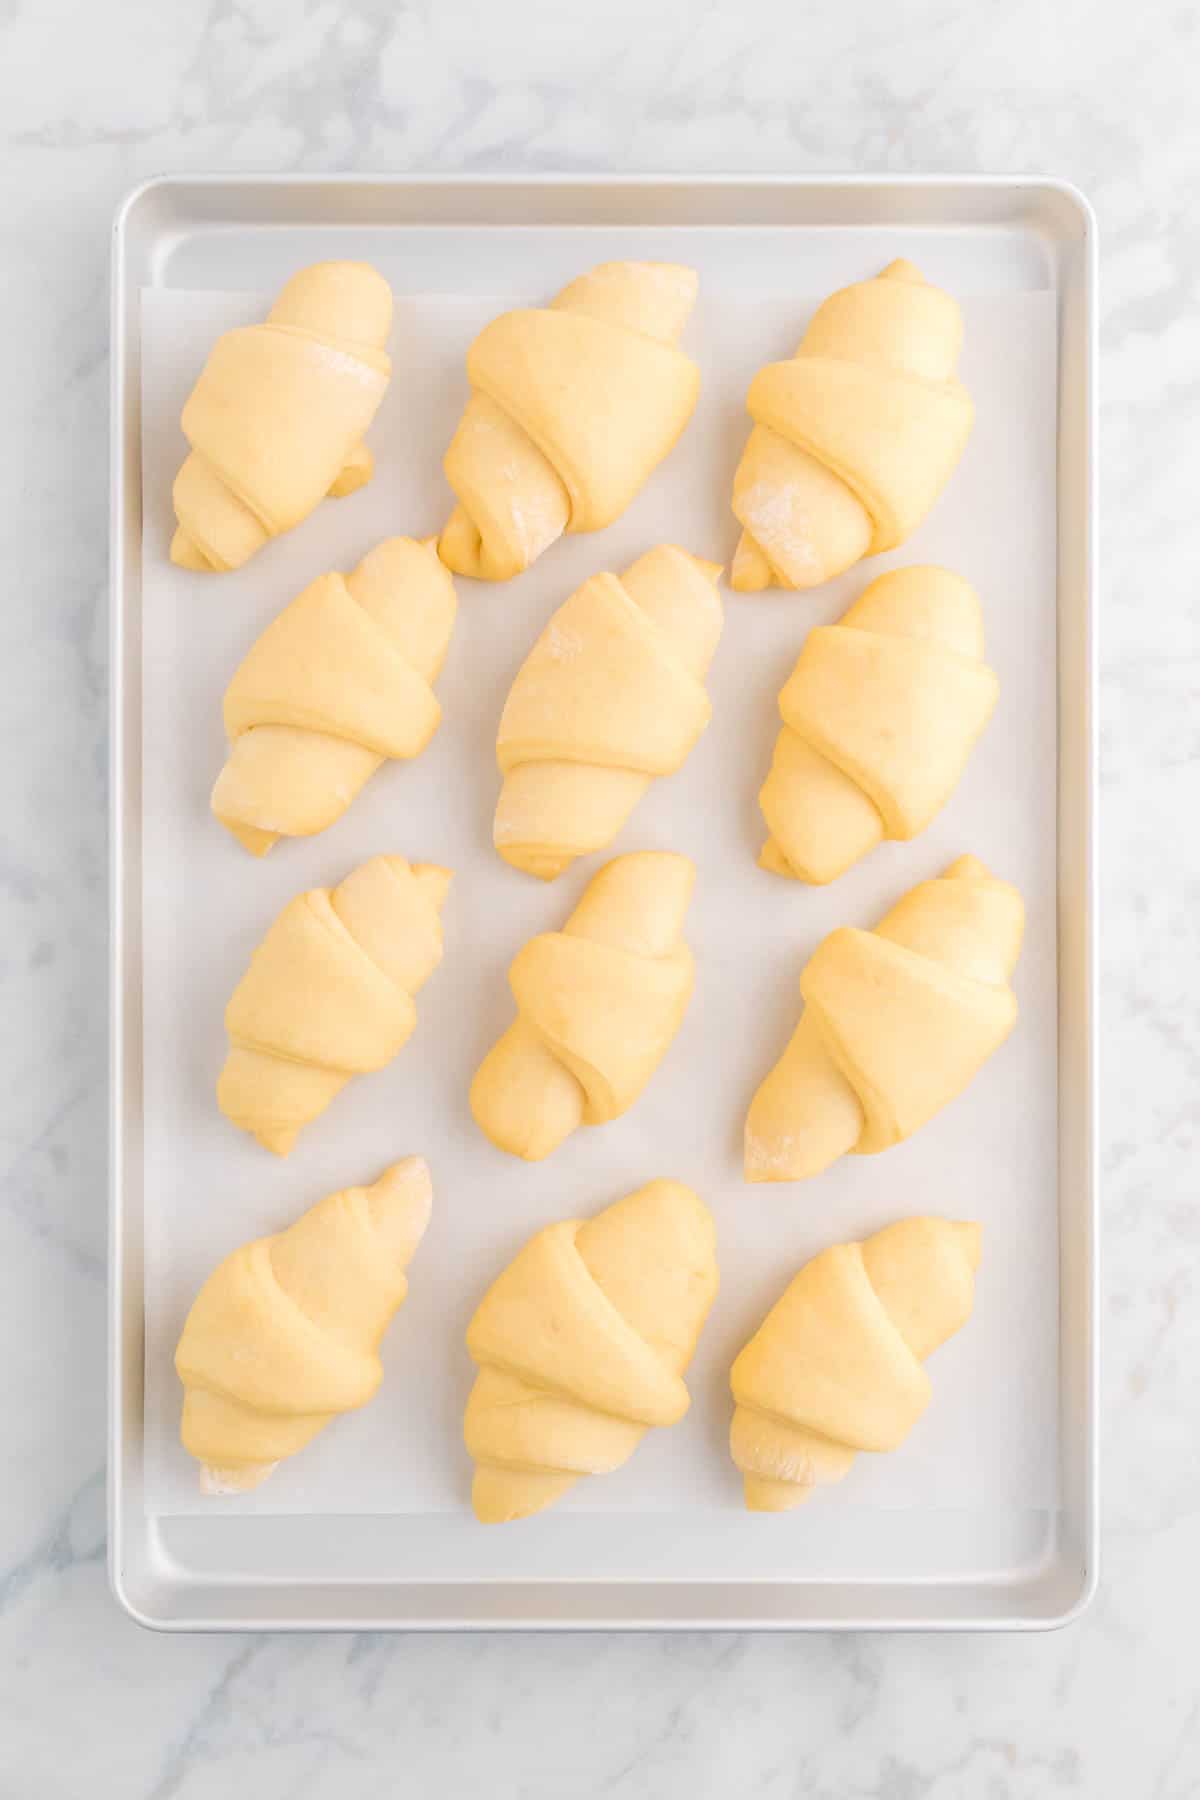 Top view of risen and unbaked crescent rolls.